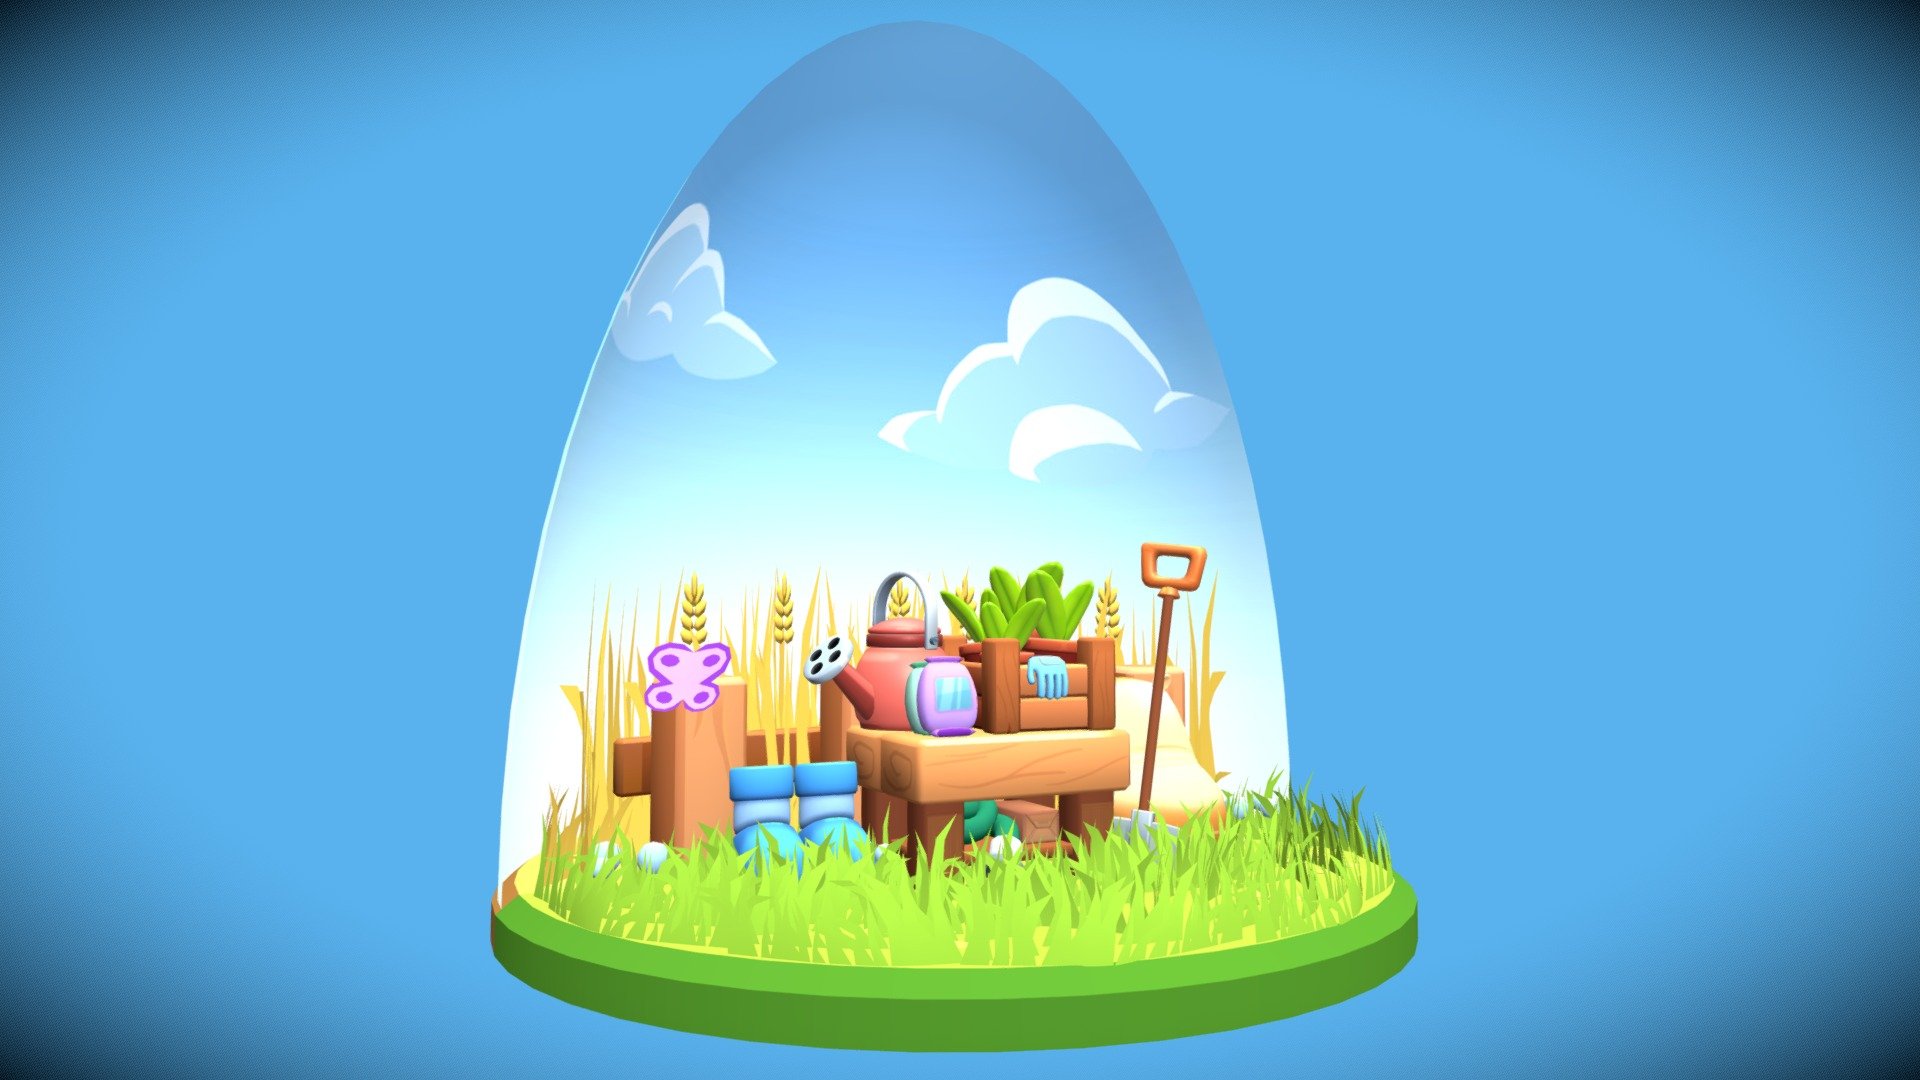 A simple cutesy farm scene.
Textures: 4
Materials: 2 - Low poly farm - 3D model by ANDRIESvdHEIDE 3d model